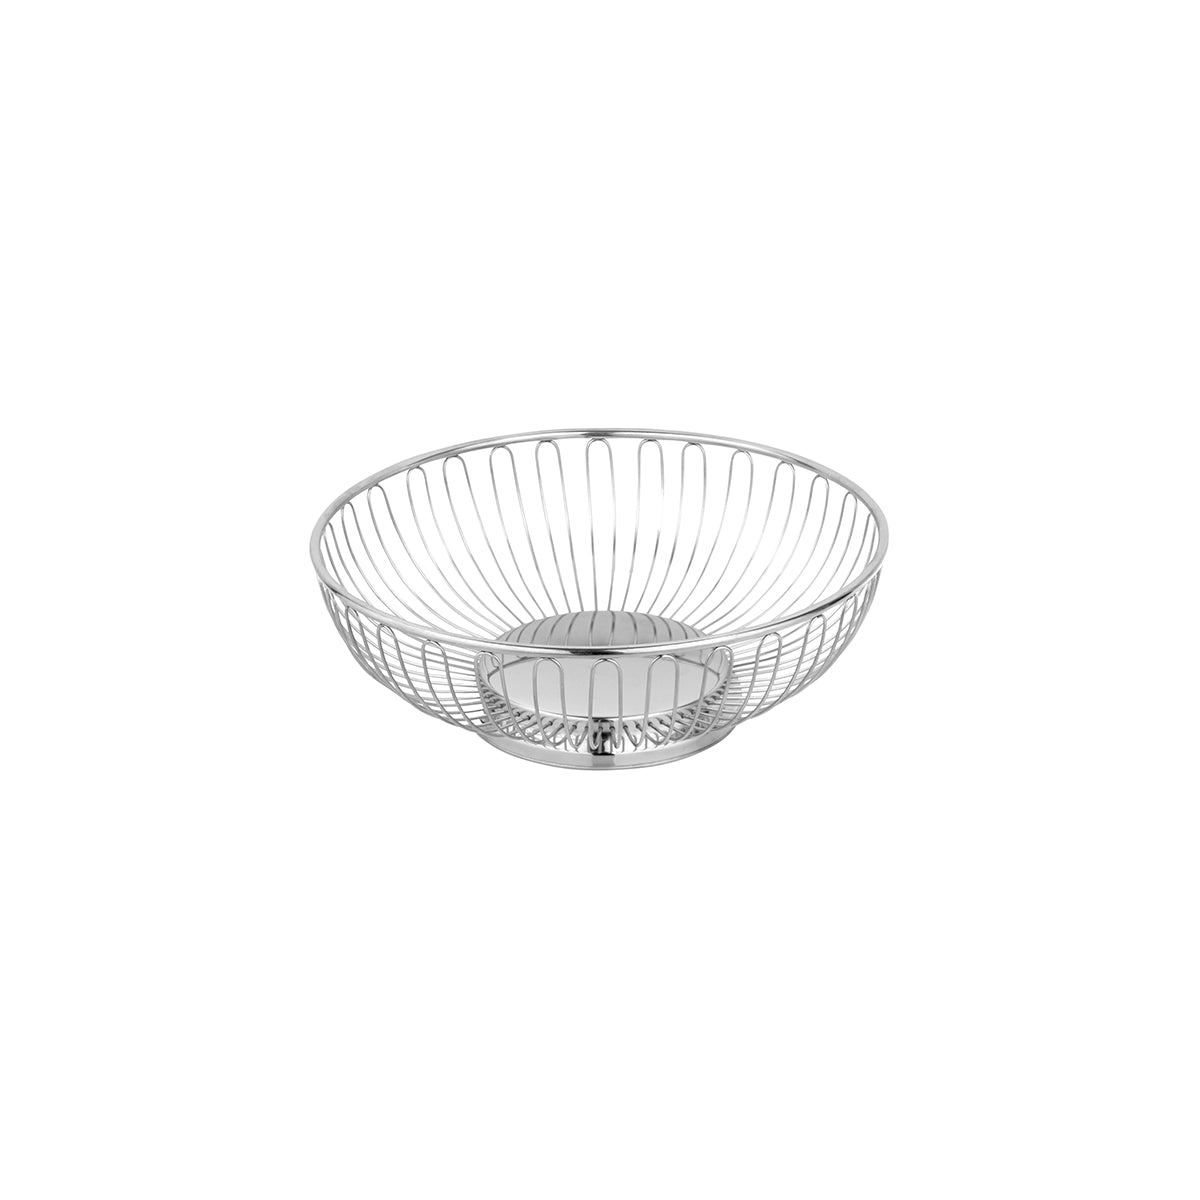 70356 Chef Inox Round Wire Basket Solid Base Stainless Steel 246x85mm Tomkin Australia Hospitality Supplies